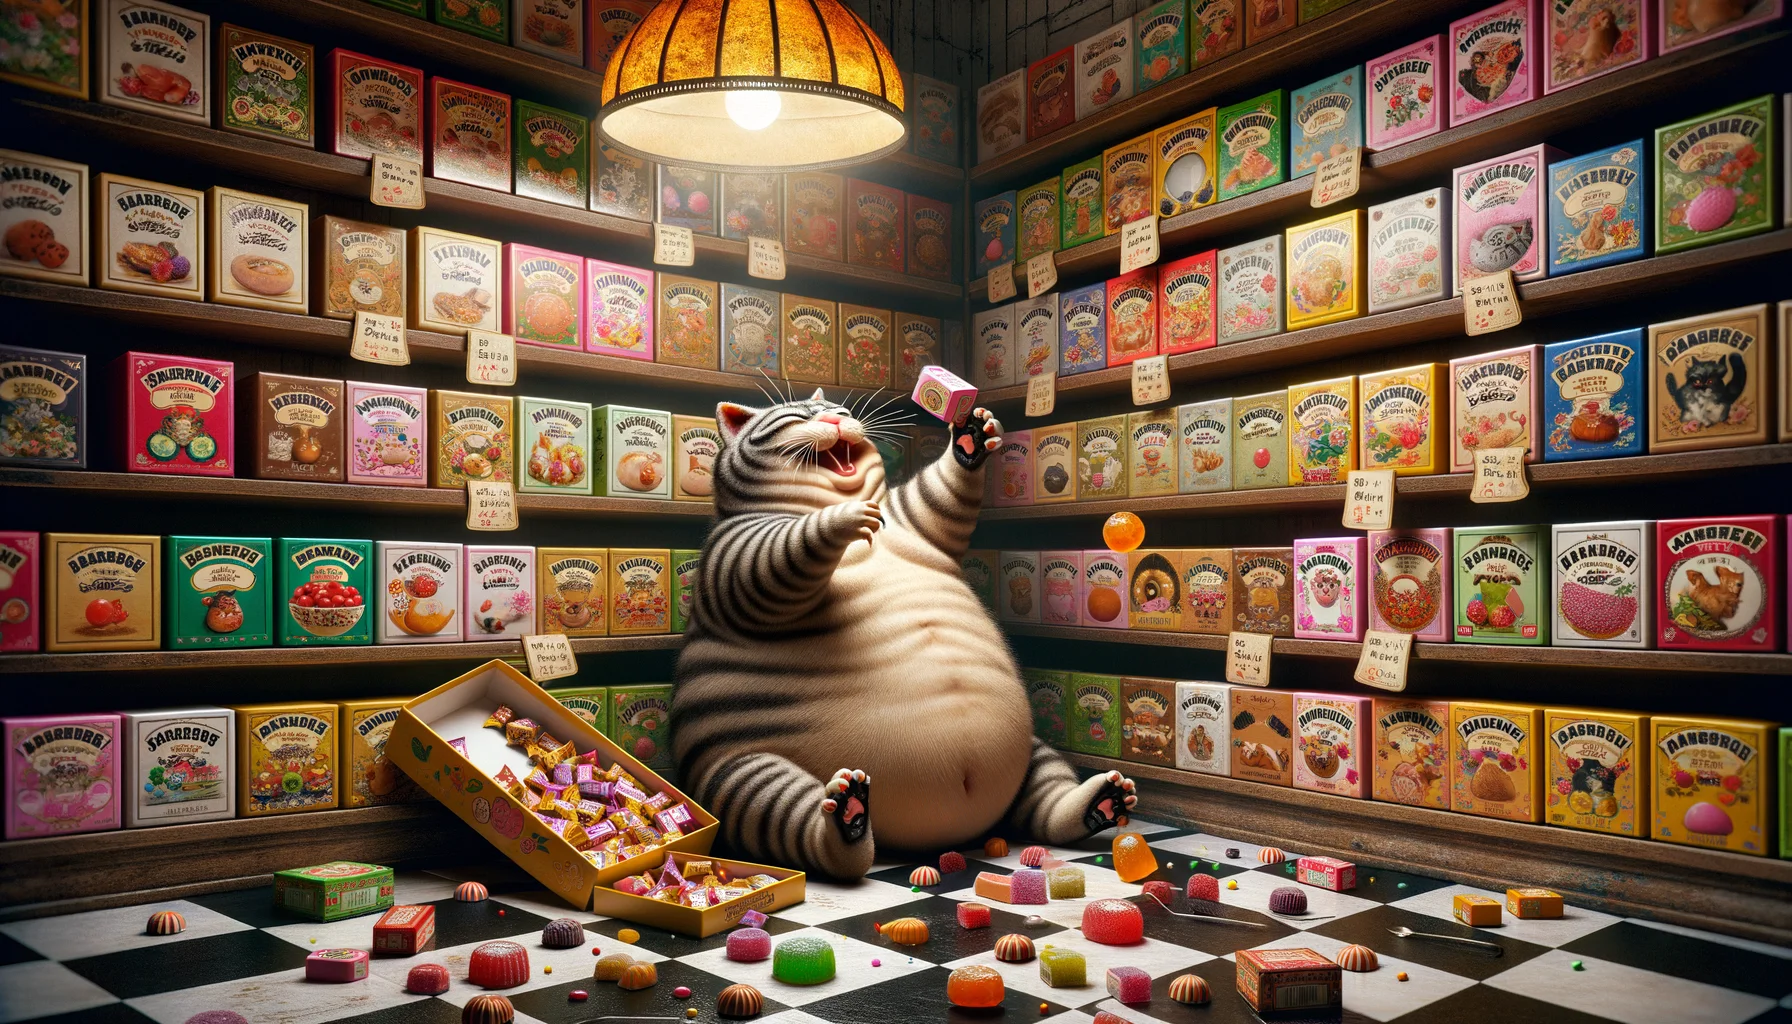 Imagine a humorous, photo-realistic scene set in a nostalgic candy store. The shelves are filled with colorful, unique candy boxes from Japan, each with decorative designs and vibrant illustrations. Front and center, a chubby tabby cat has managed to open a box, and it's hilariously trying to catch an escaping gummy with its paw. Candy wrappers are scattered across the checkered floor. Humorous little signs saying 'Buy Japanese Candy Boxes' are strategically placed all around the store, with one even hanging from the cat's tail. Bright light from an old-fashioned pendant lamp bathes the whole scene, making the candies glisten enticingly.